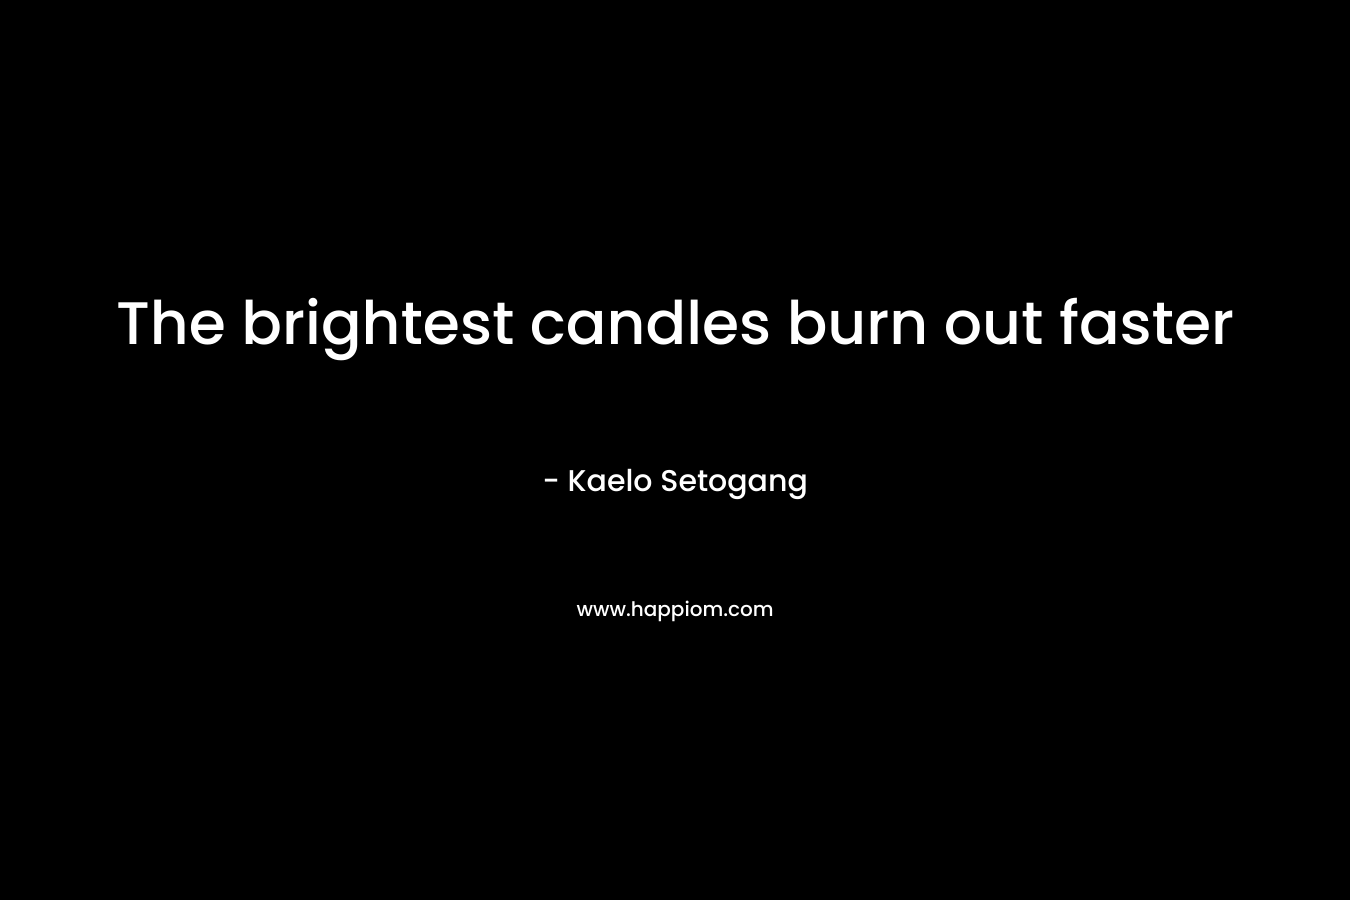 The brightest candles burn out faster – Kaelo Setogang